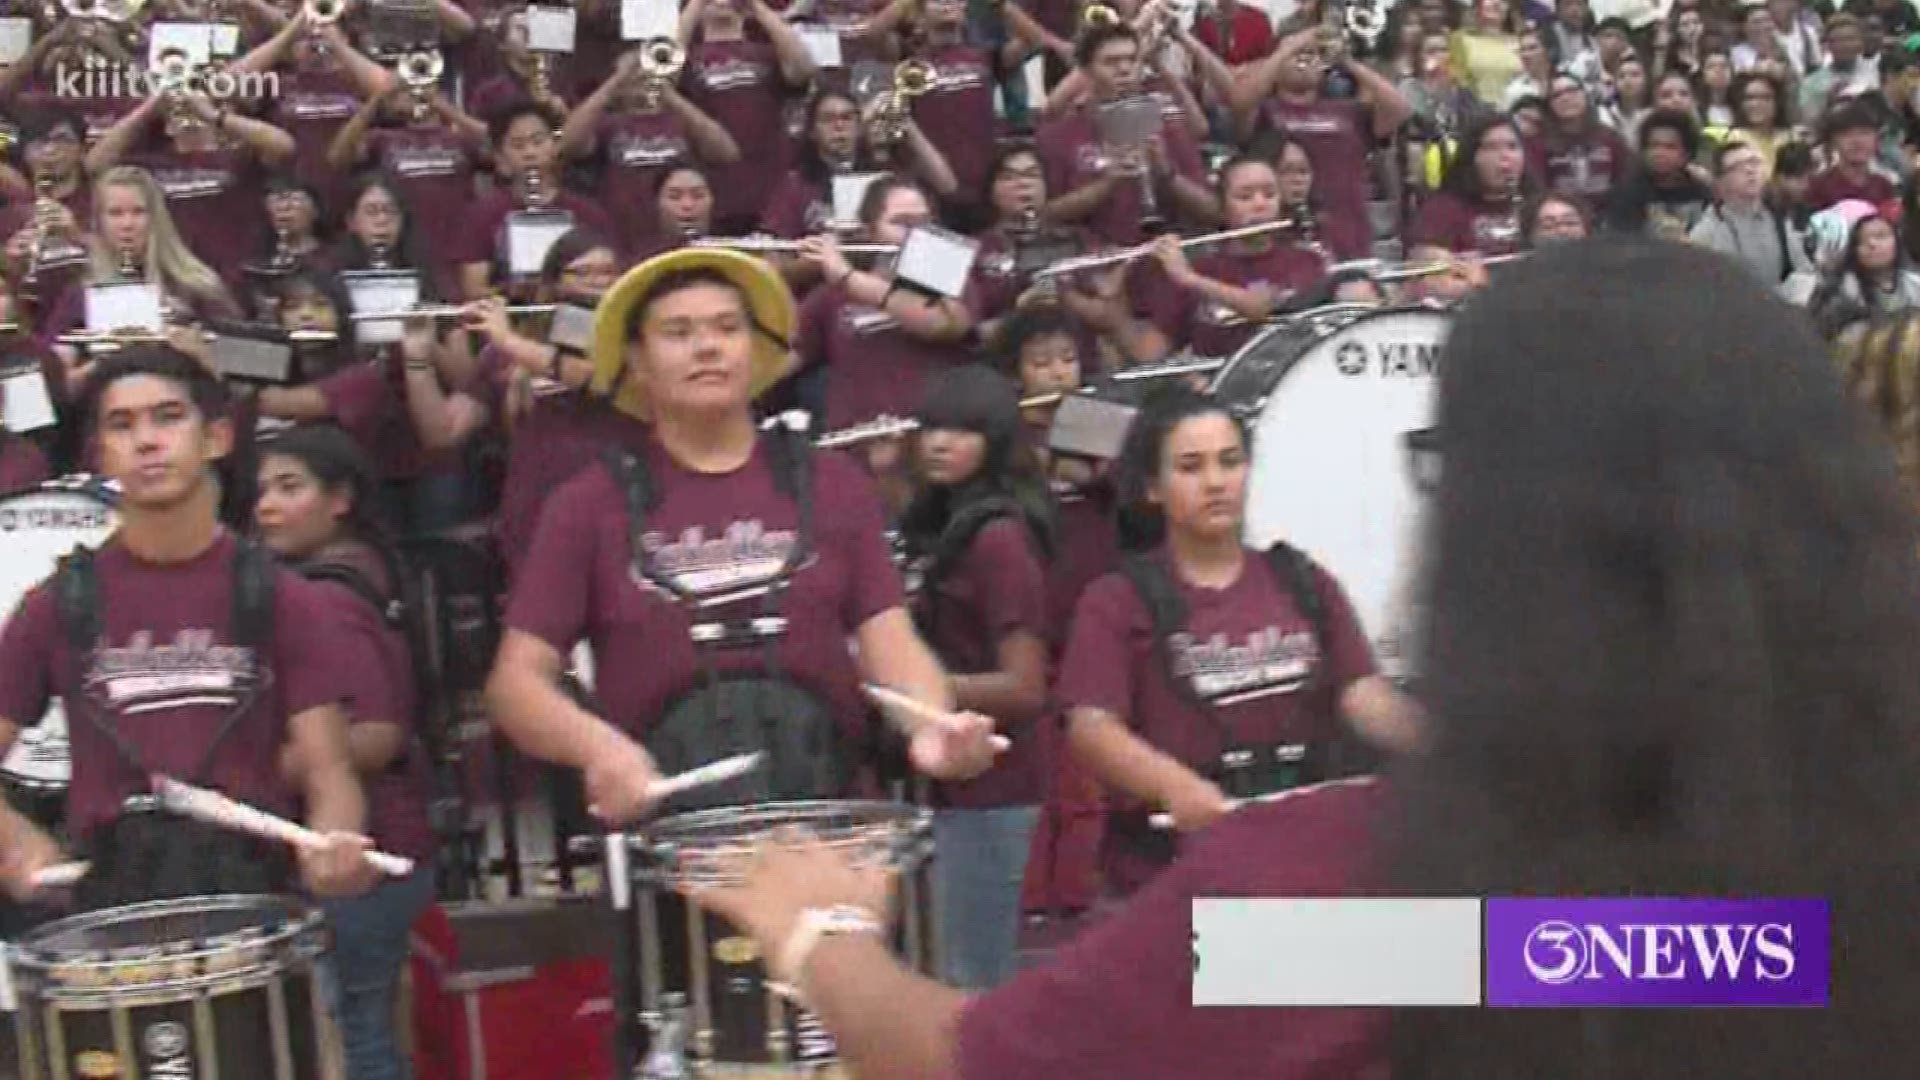 It's time for the Friday Night Sports Blitz, and that means crowning this weeks winner of the 3News Band of the Week contest -- the Calallen Wildcats!